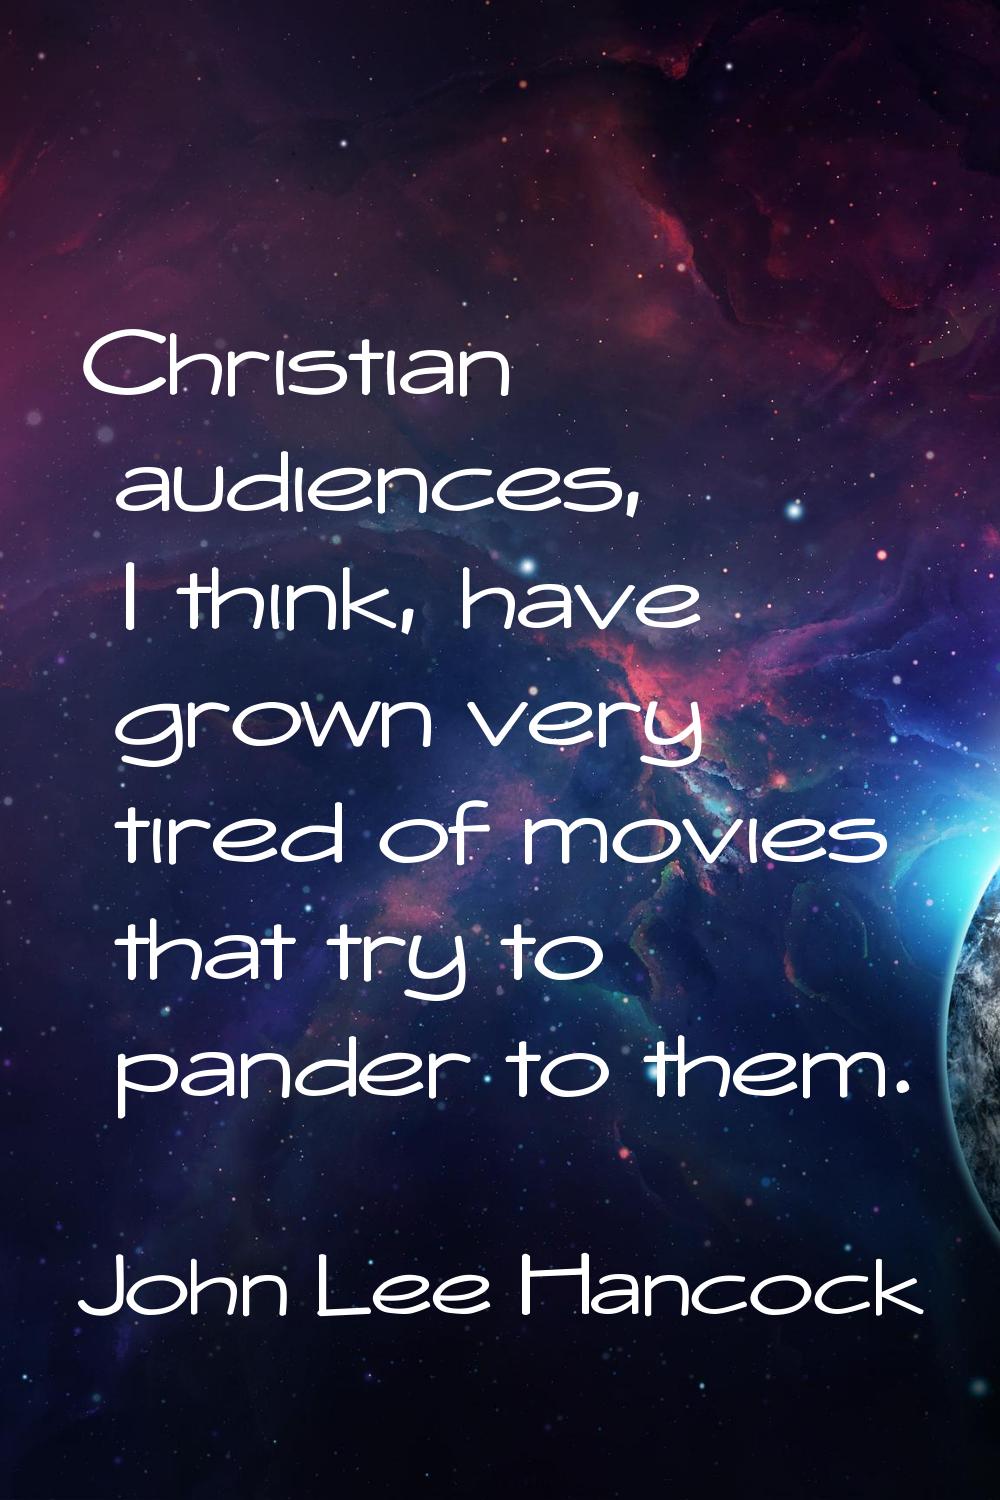 Christian audiences, I think, have grown very tired of movies that try to pander to them.